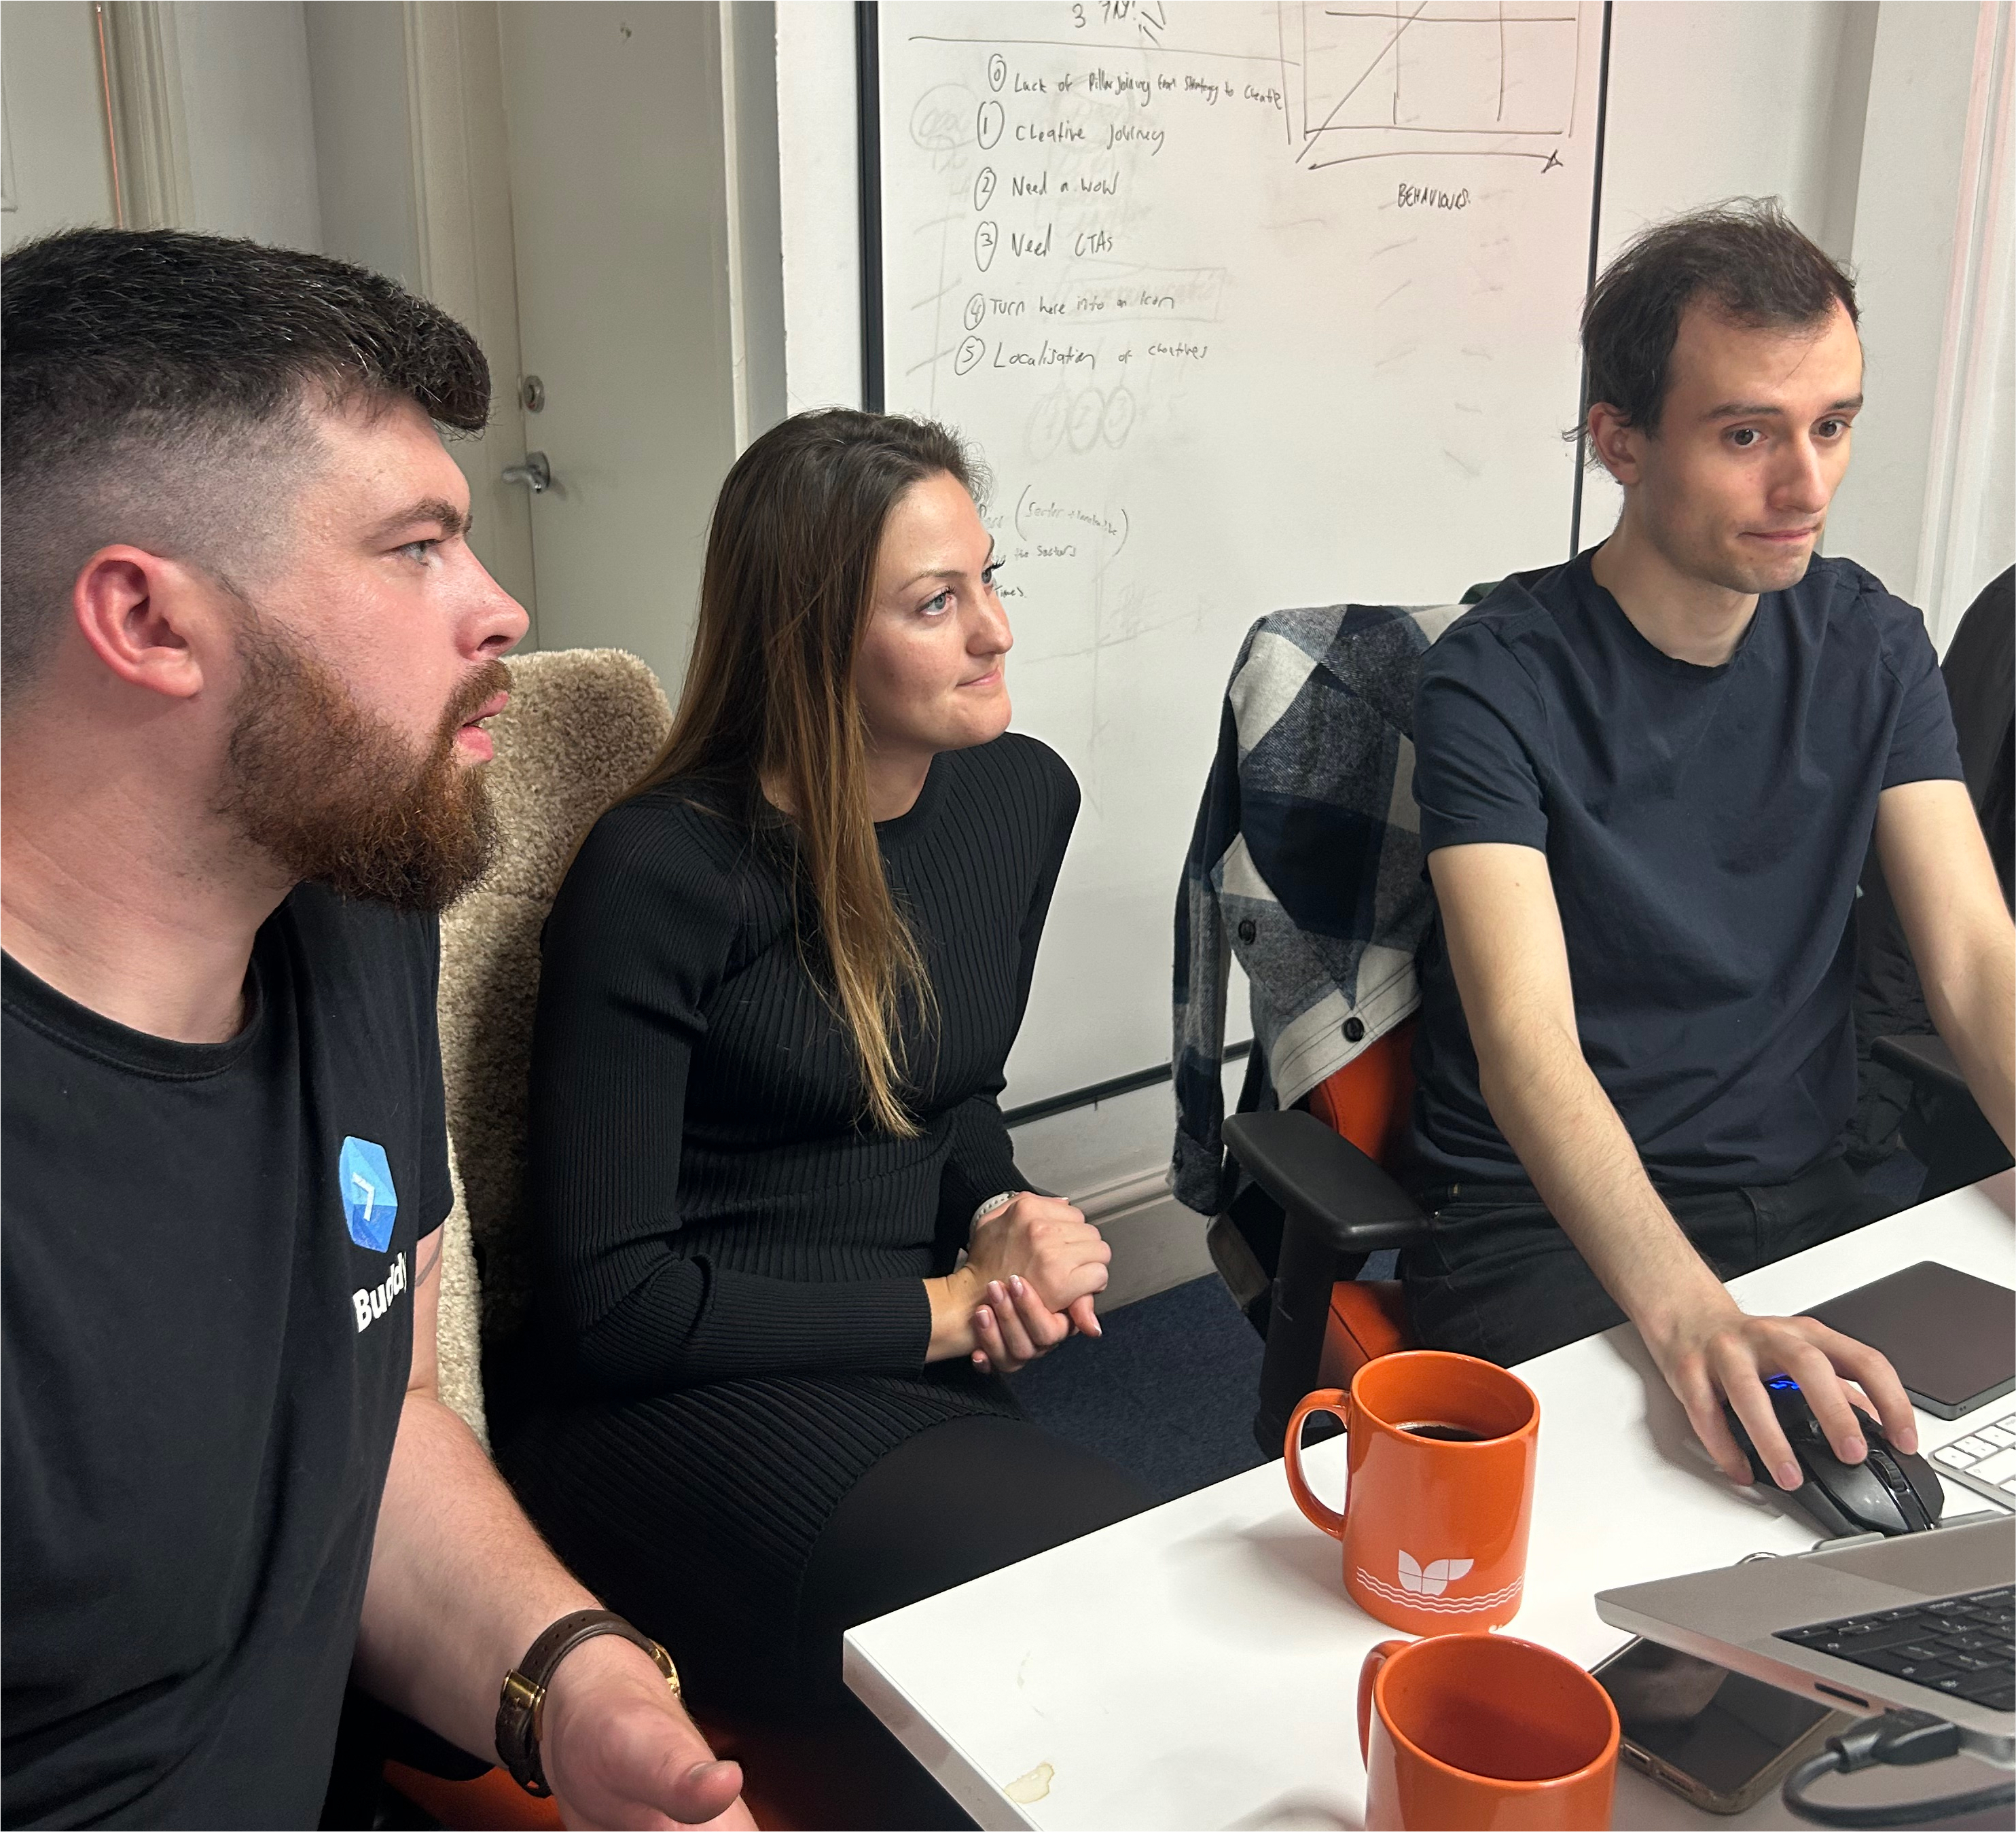 Three of Cyber-Duck's developers. They are sitting at a desk and discussing what they are working on, with cups of coffee on the desk in front of them.